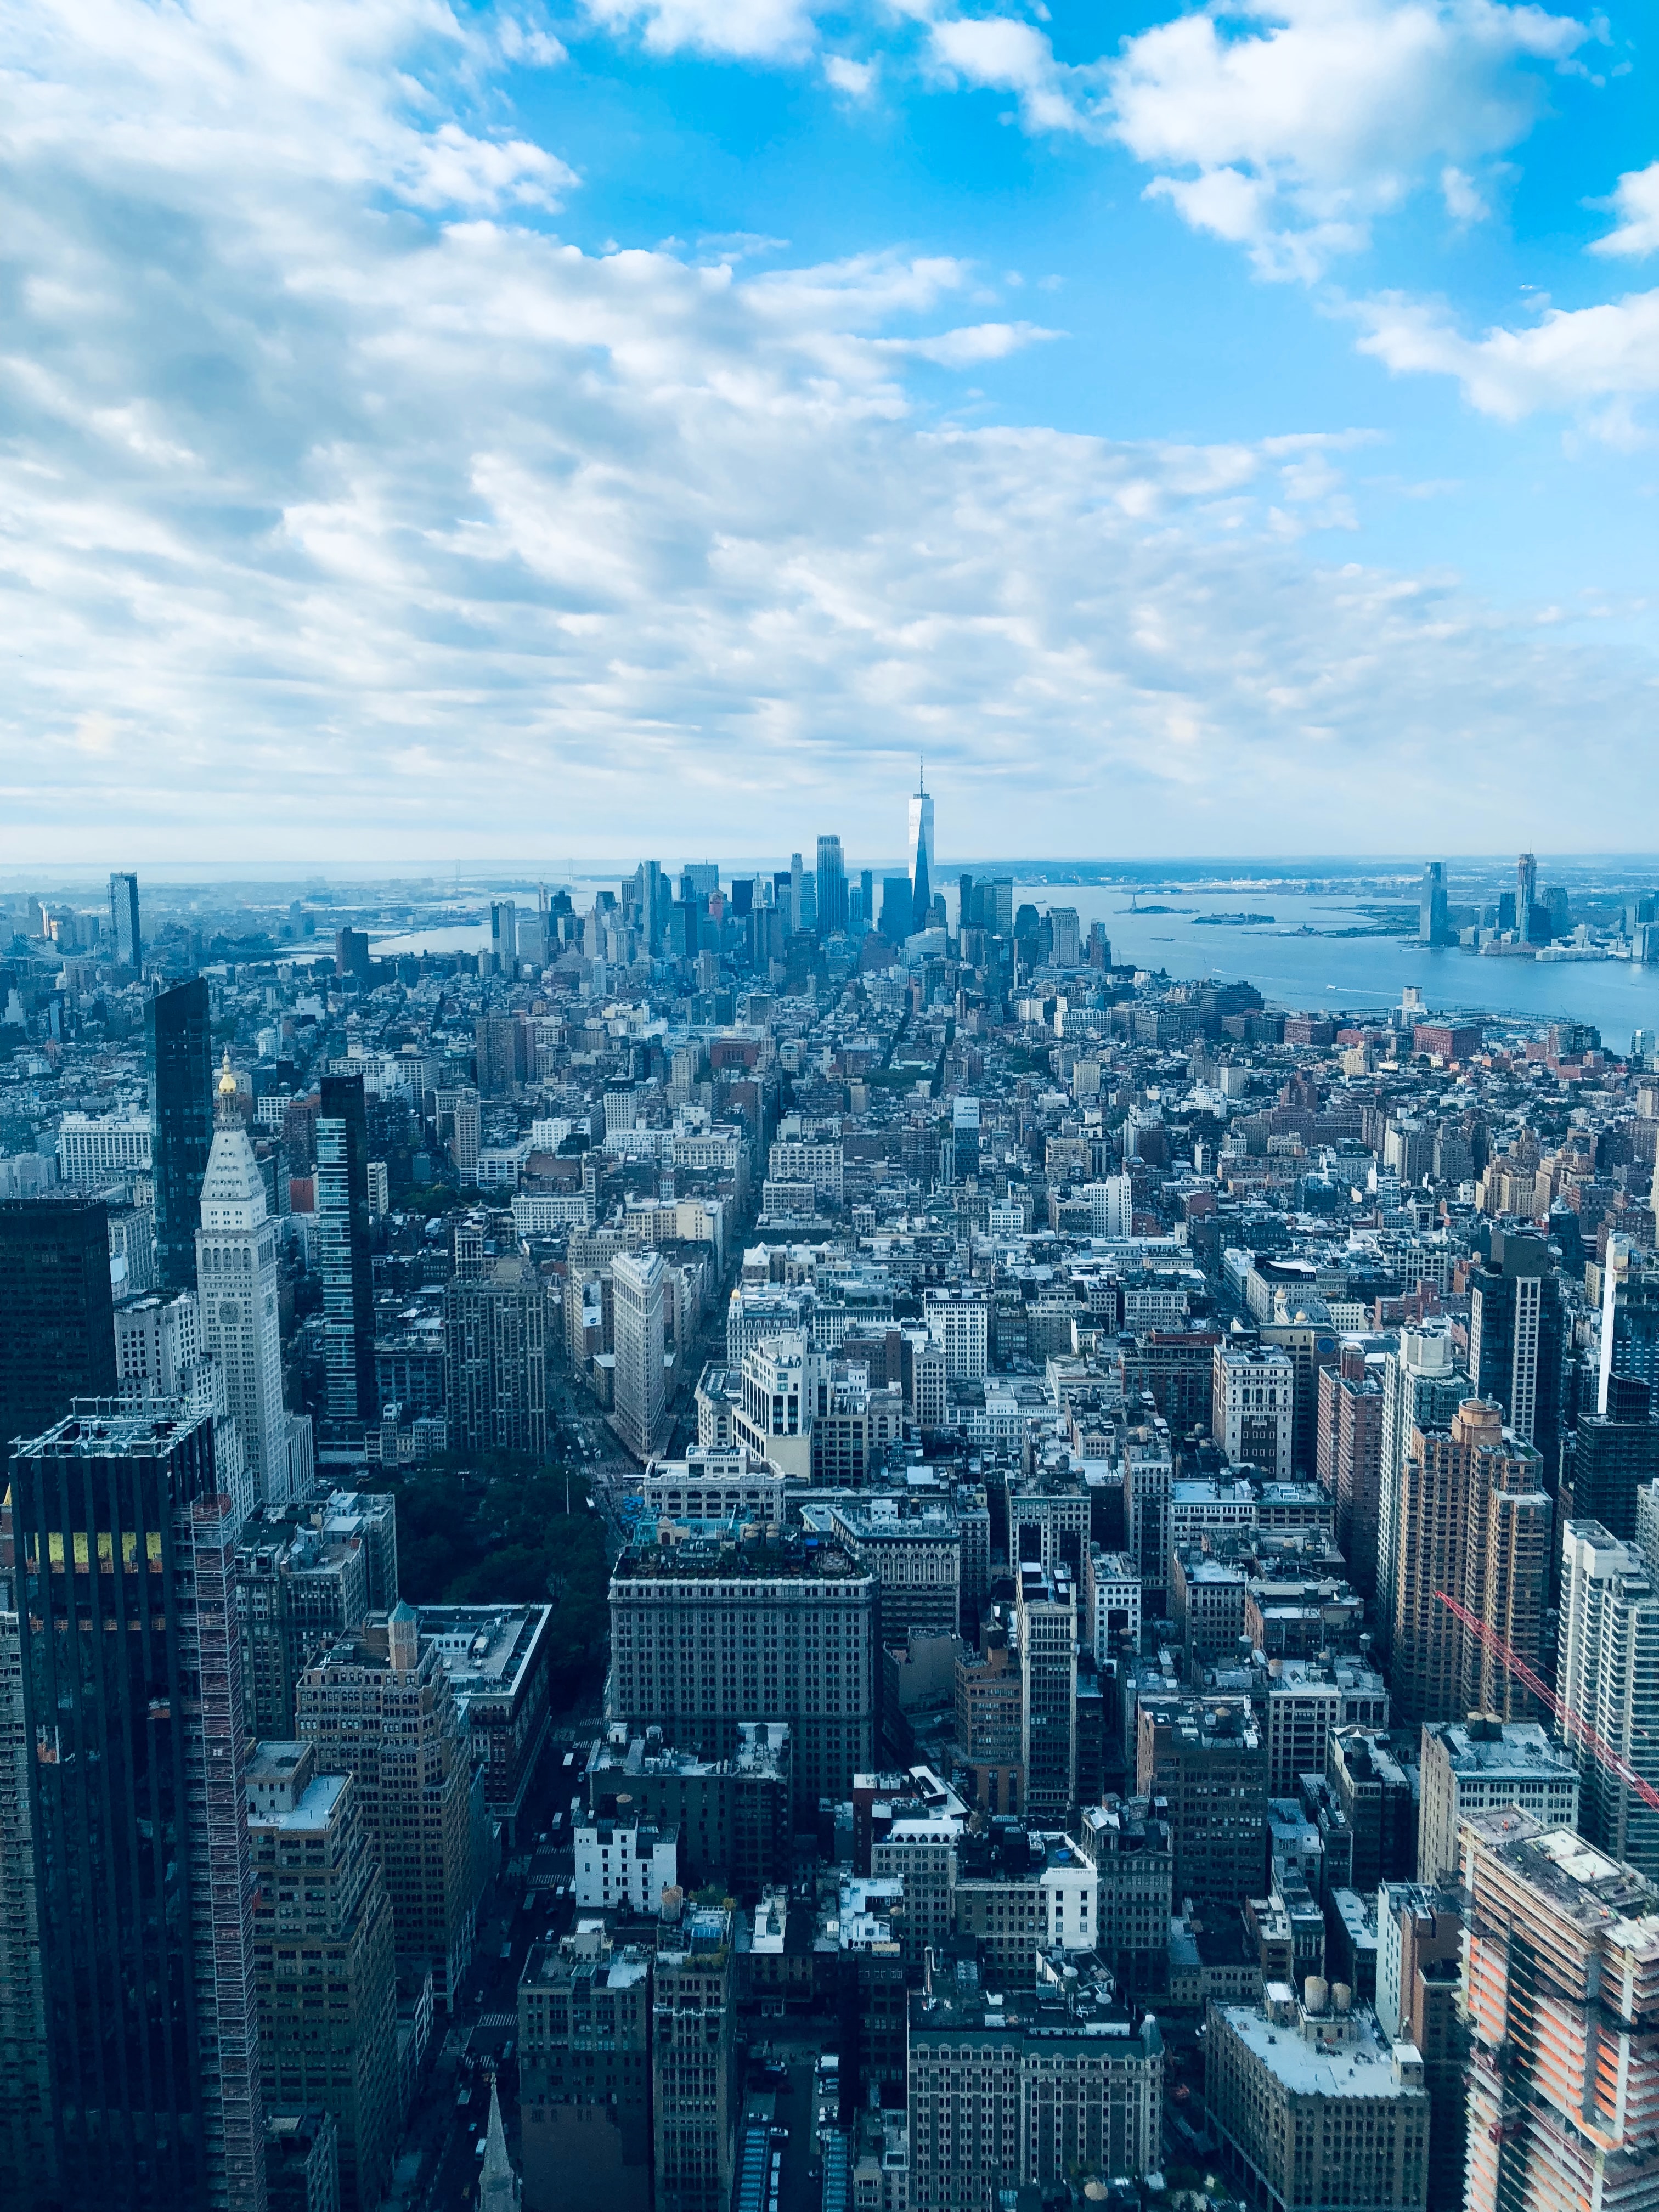 new york, urban landscape, cities, city, building, view from above, megapolis, megalopolis, cityscape